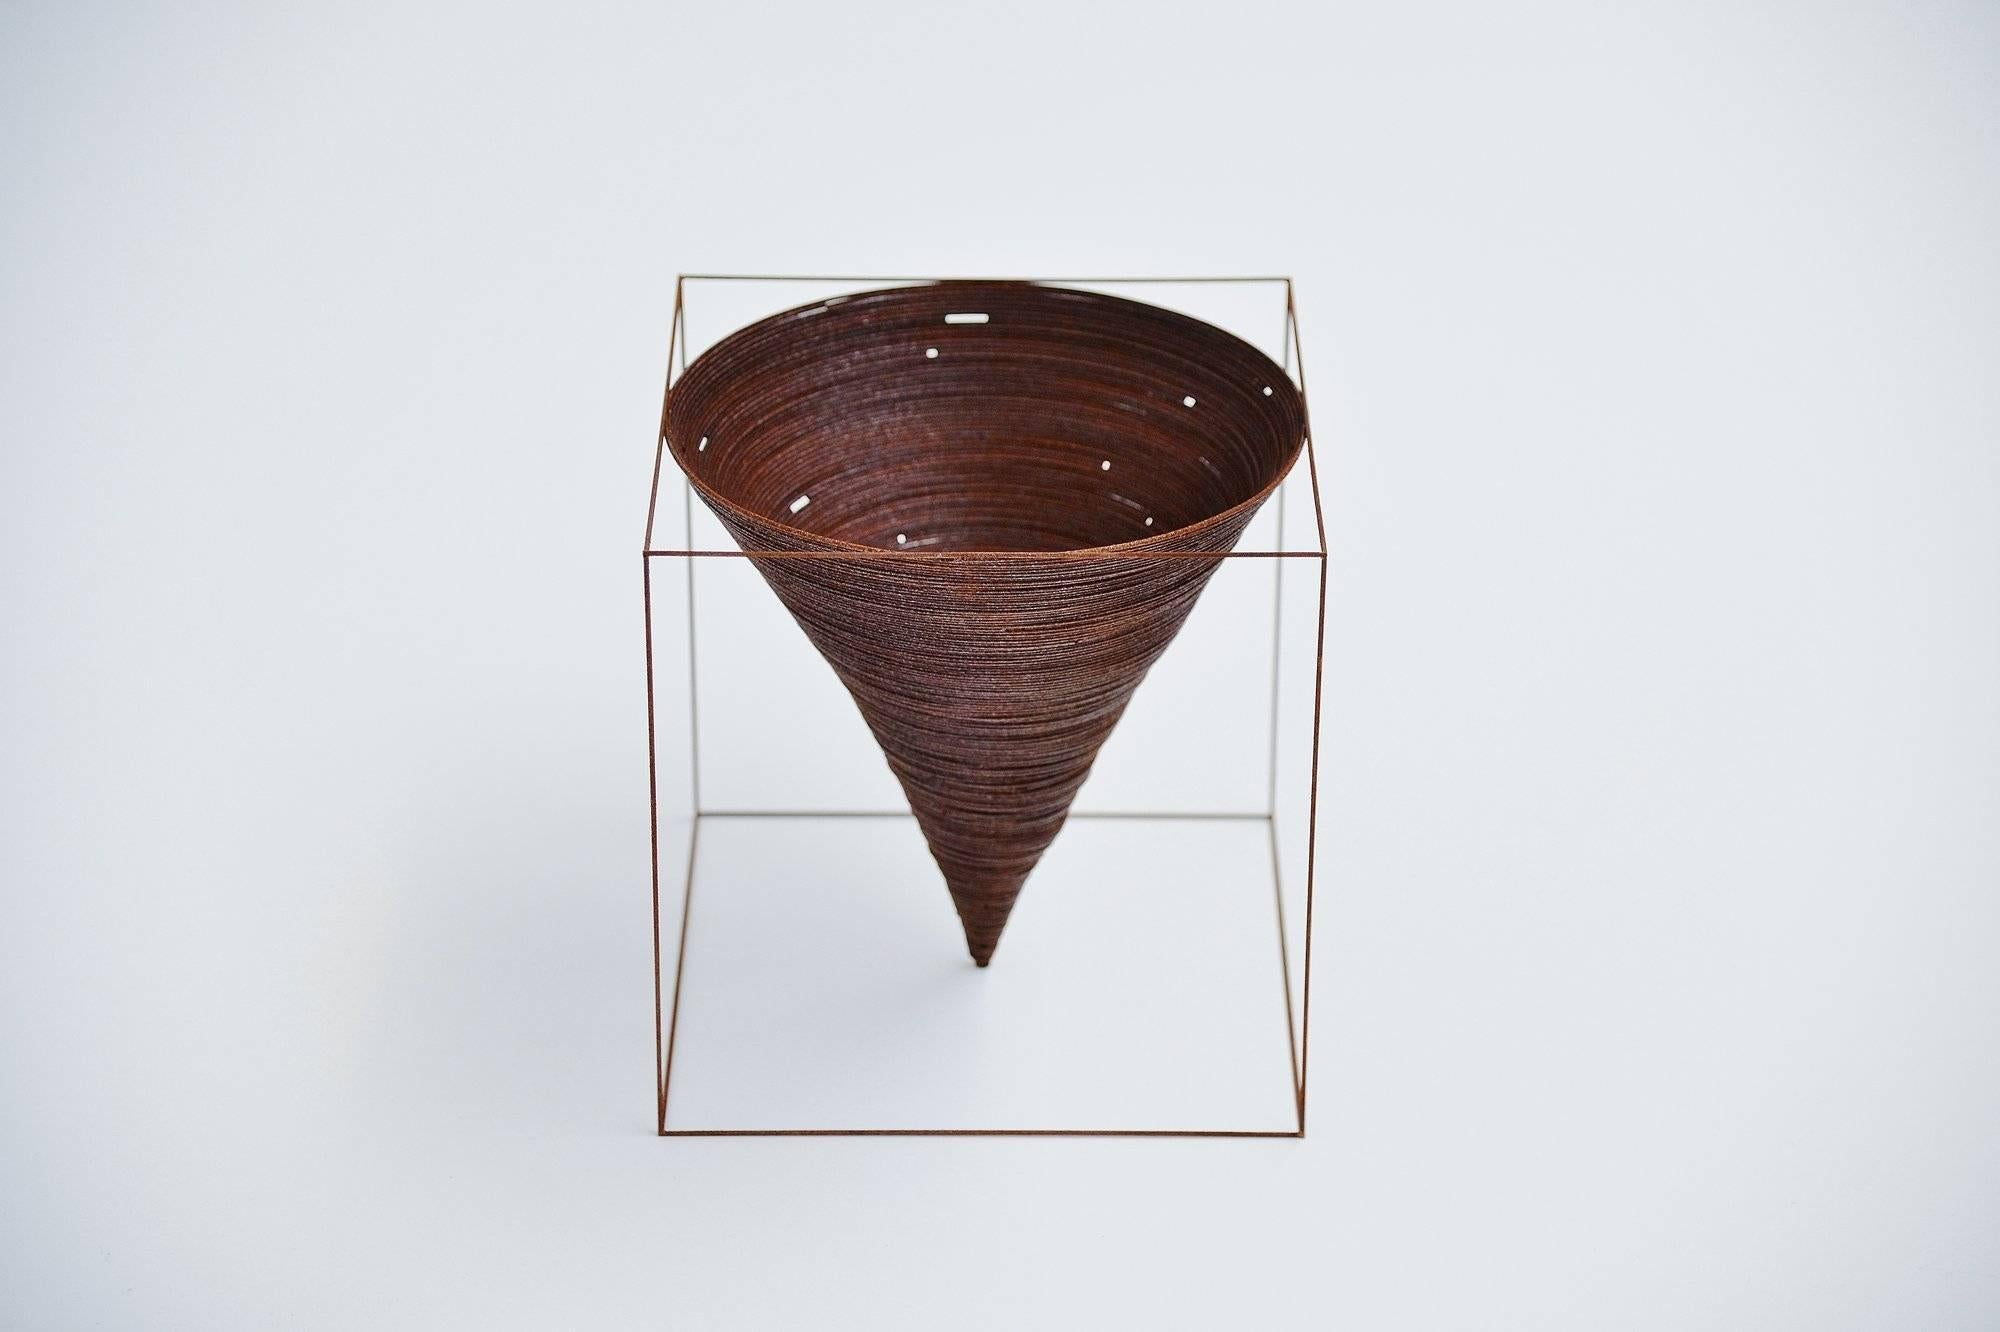 This is for a steel oxidated cube designed and made by Anne Rose Regenboog, Den Haag 2016. This cube is from a series of 4 unica's made of steel and is finished with oxidation to provoke the rust process and making these metal artworks all different